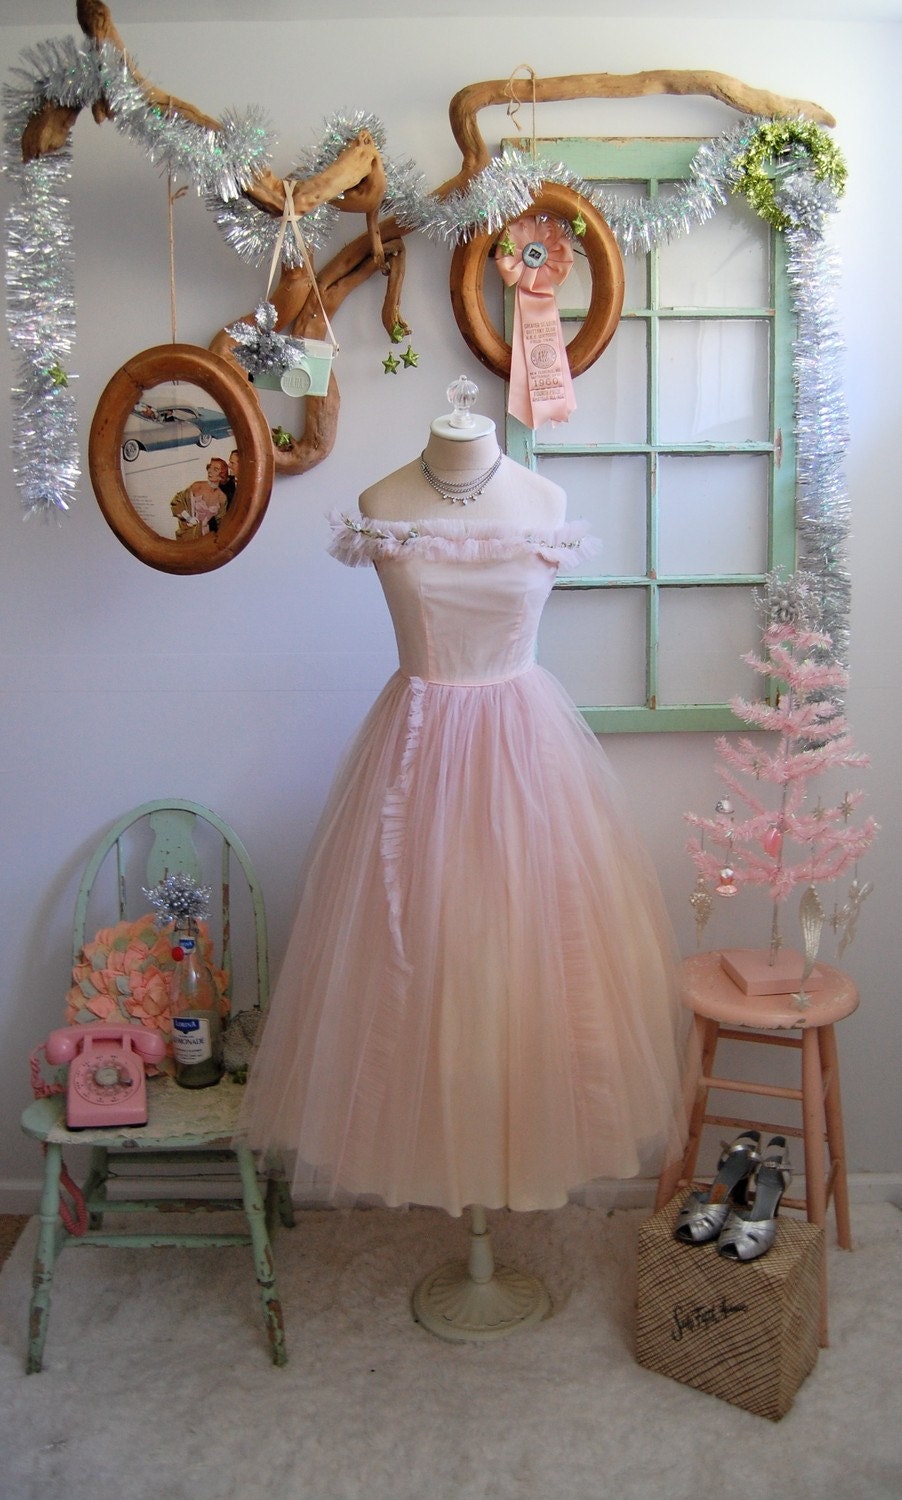 The Paige- Vintage 1950s Pale Pink Ballerina Tulle Floral Party Dress